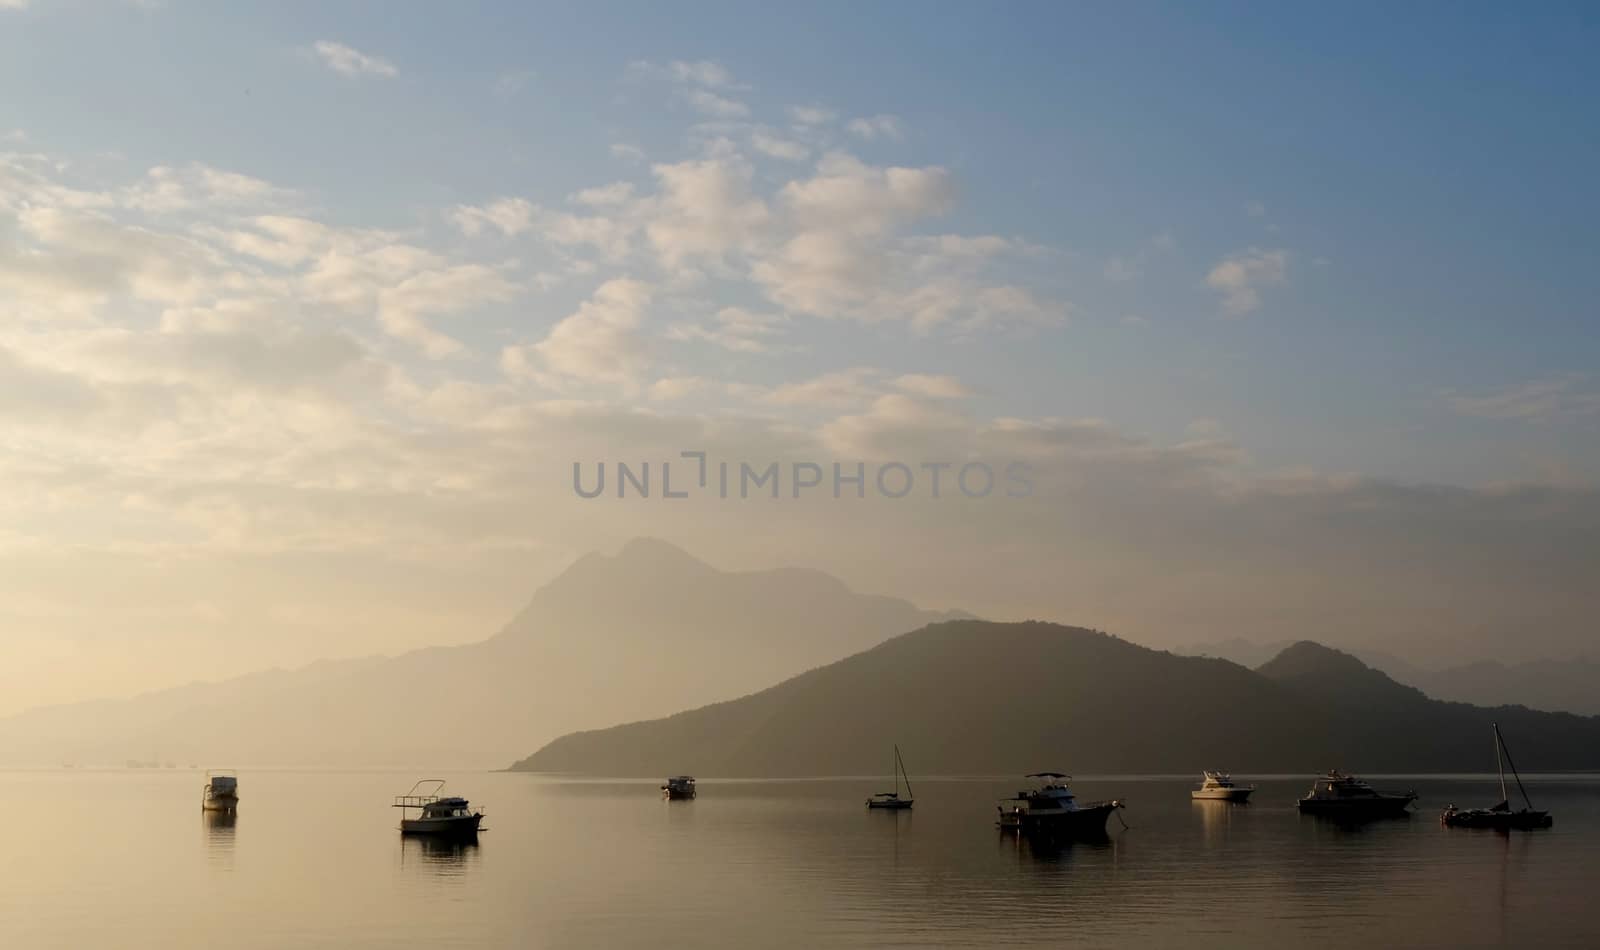 The foggy sunrise landscape photo with boat, mountain in the morning